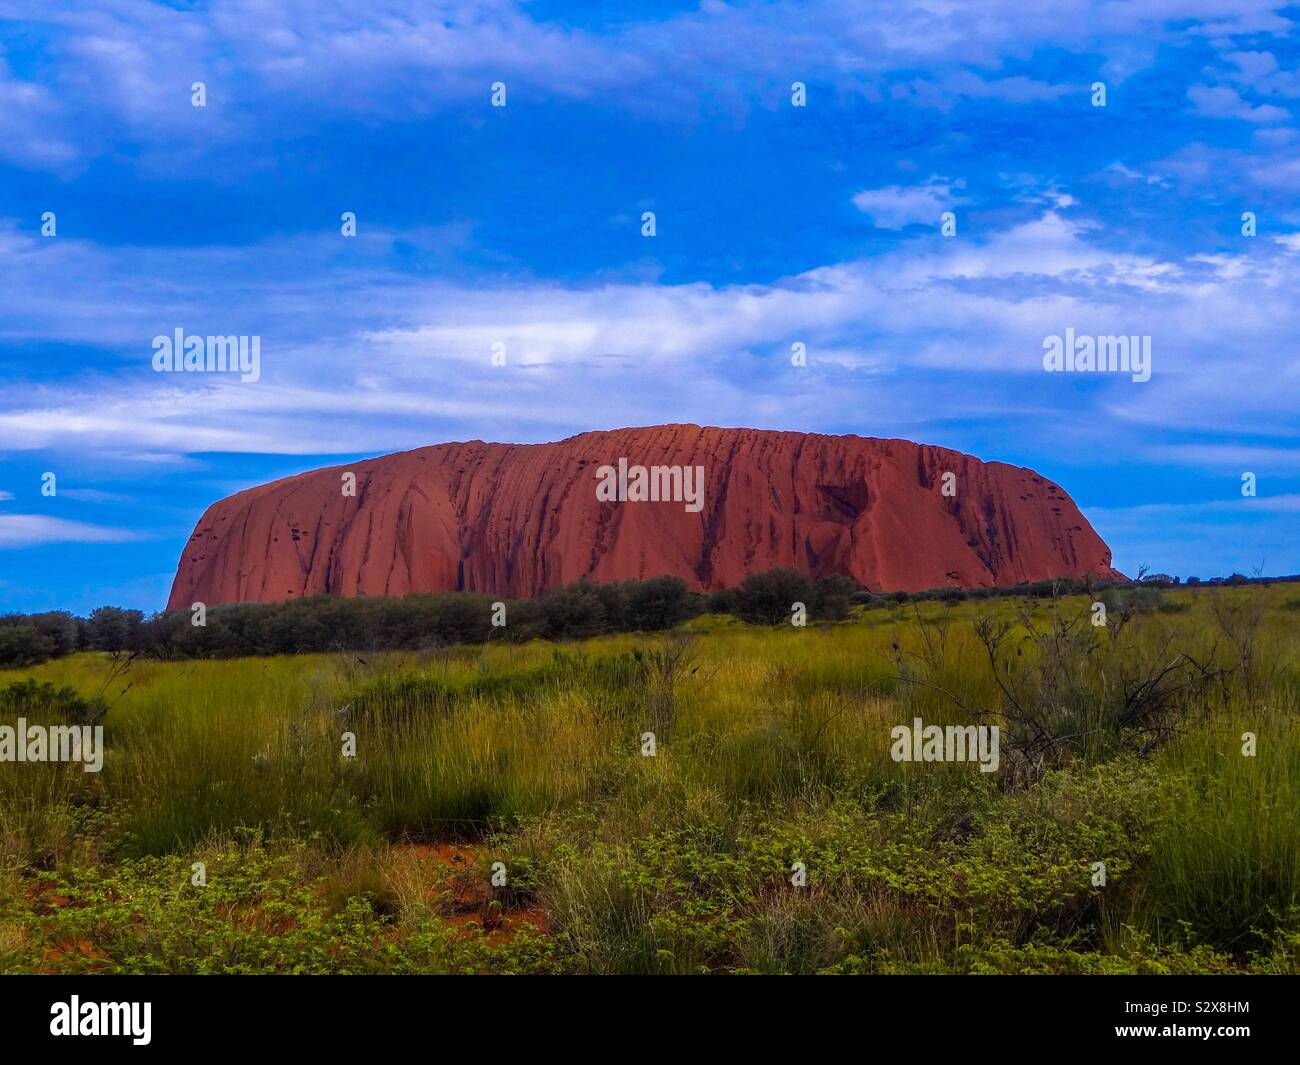 Cloudy Sunset at Ayers Rock in Australia Stock Photo